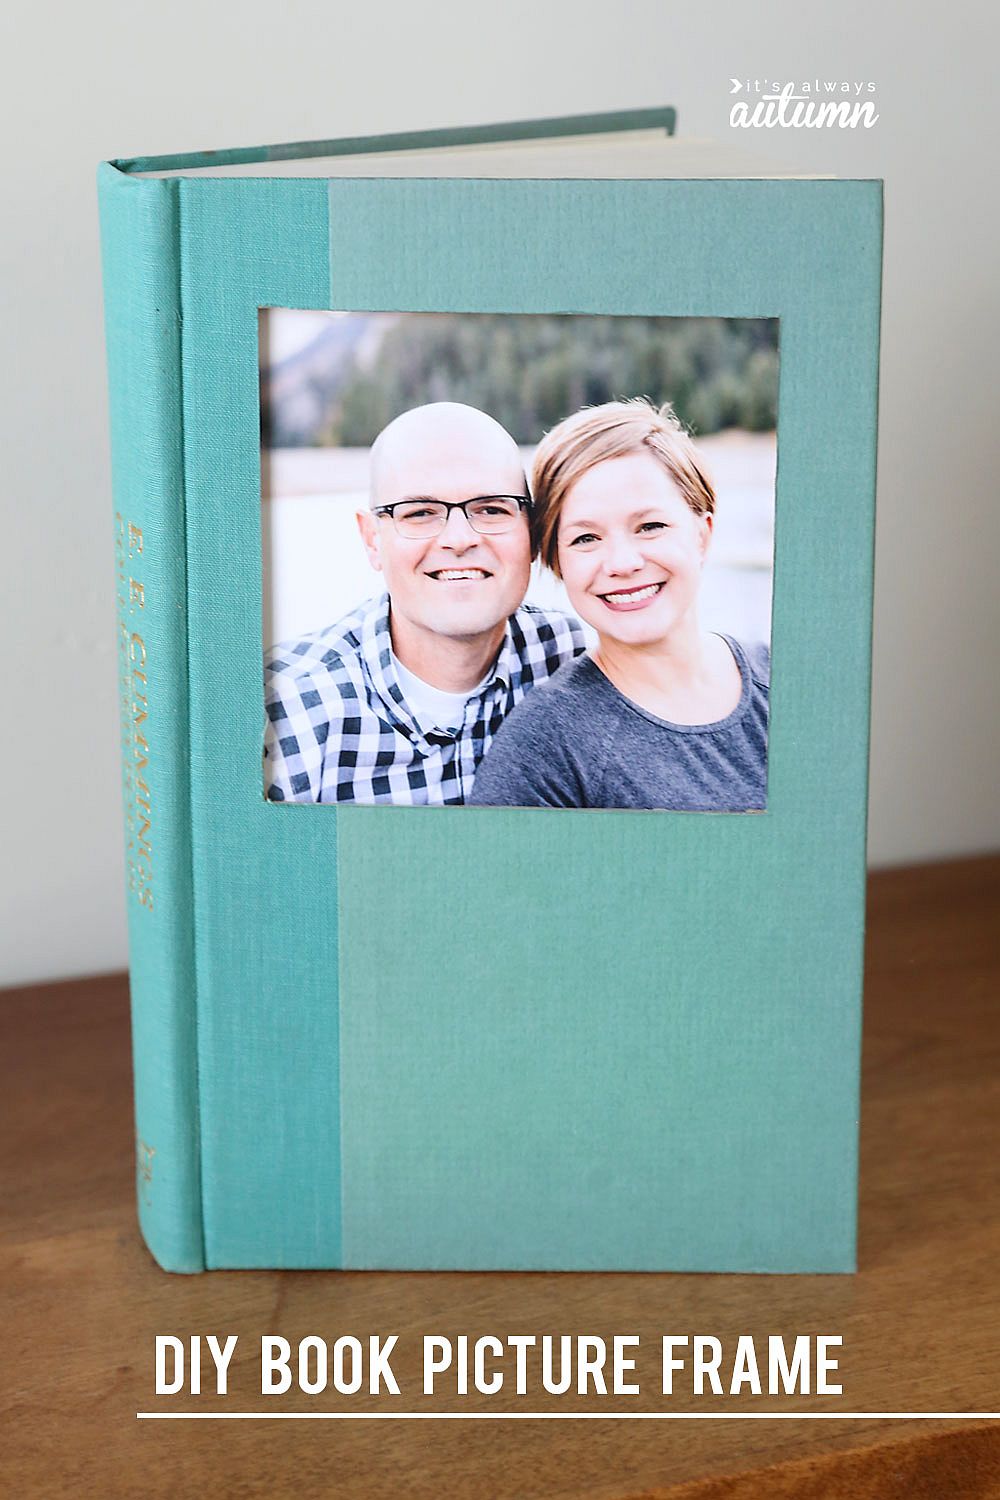 Easy-to-craft-DIY-book-picture-frame-idea-71299